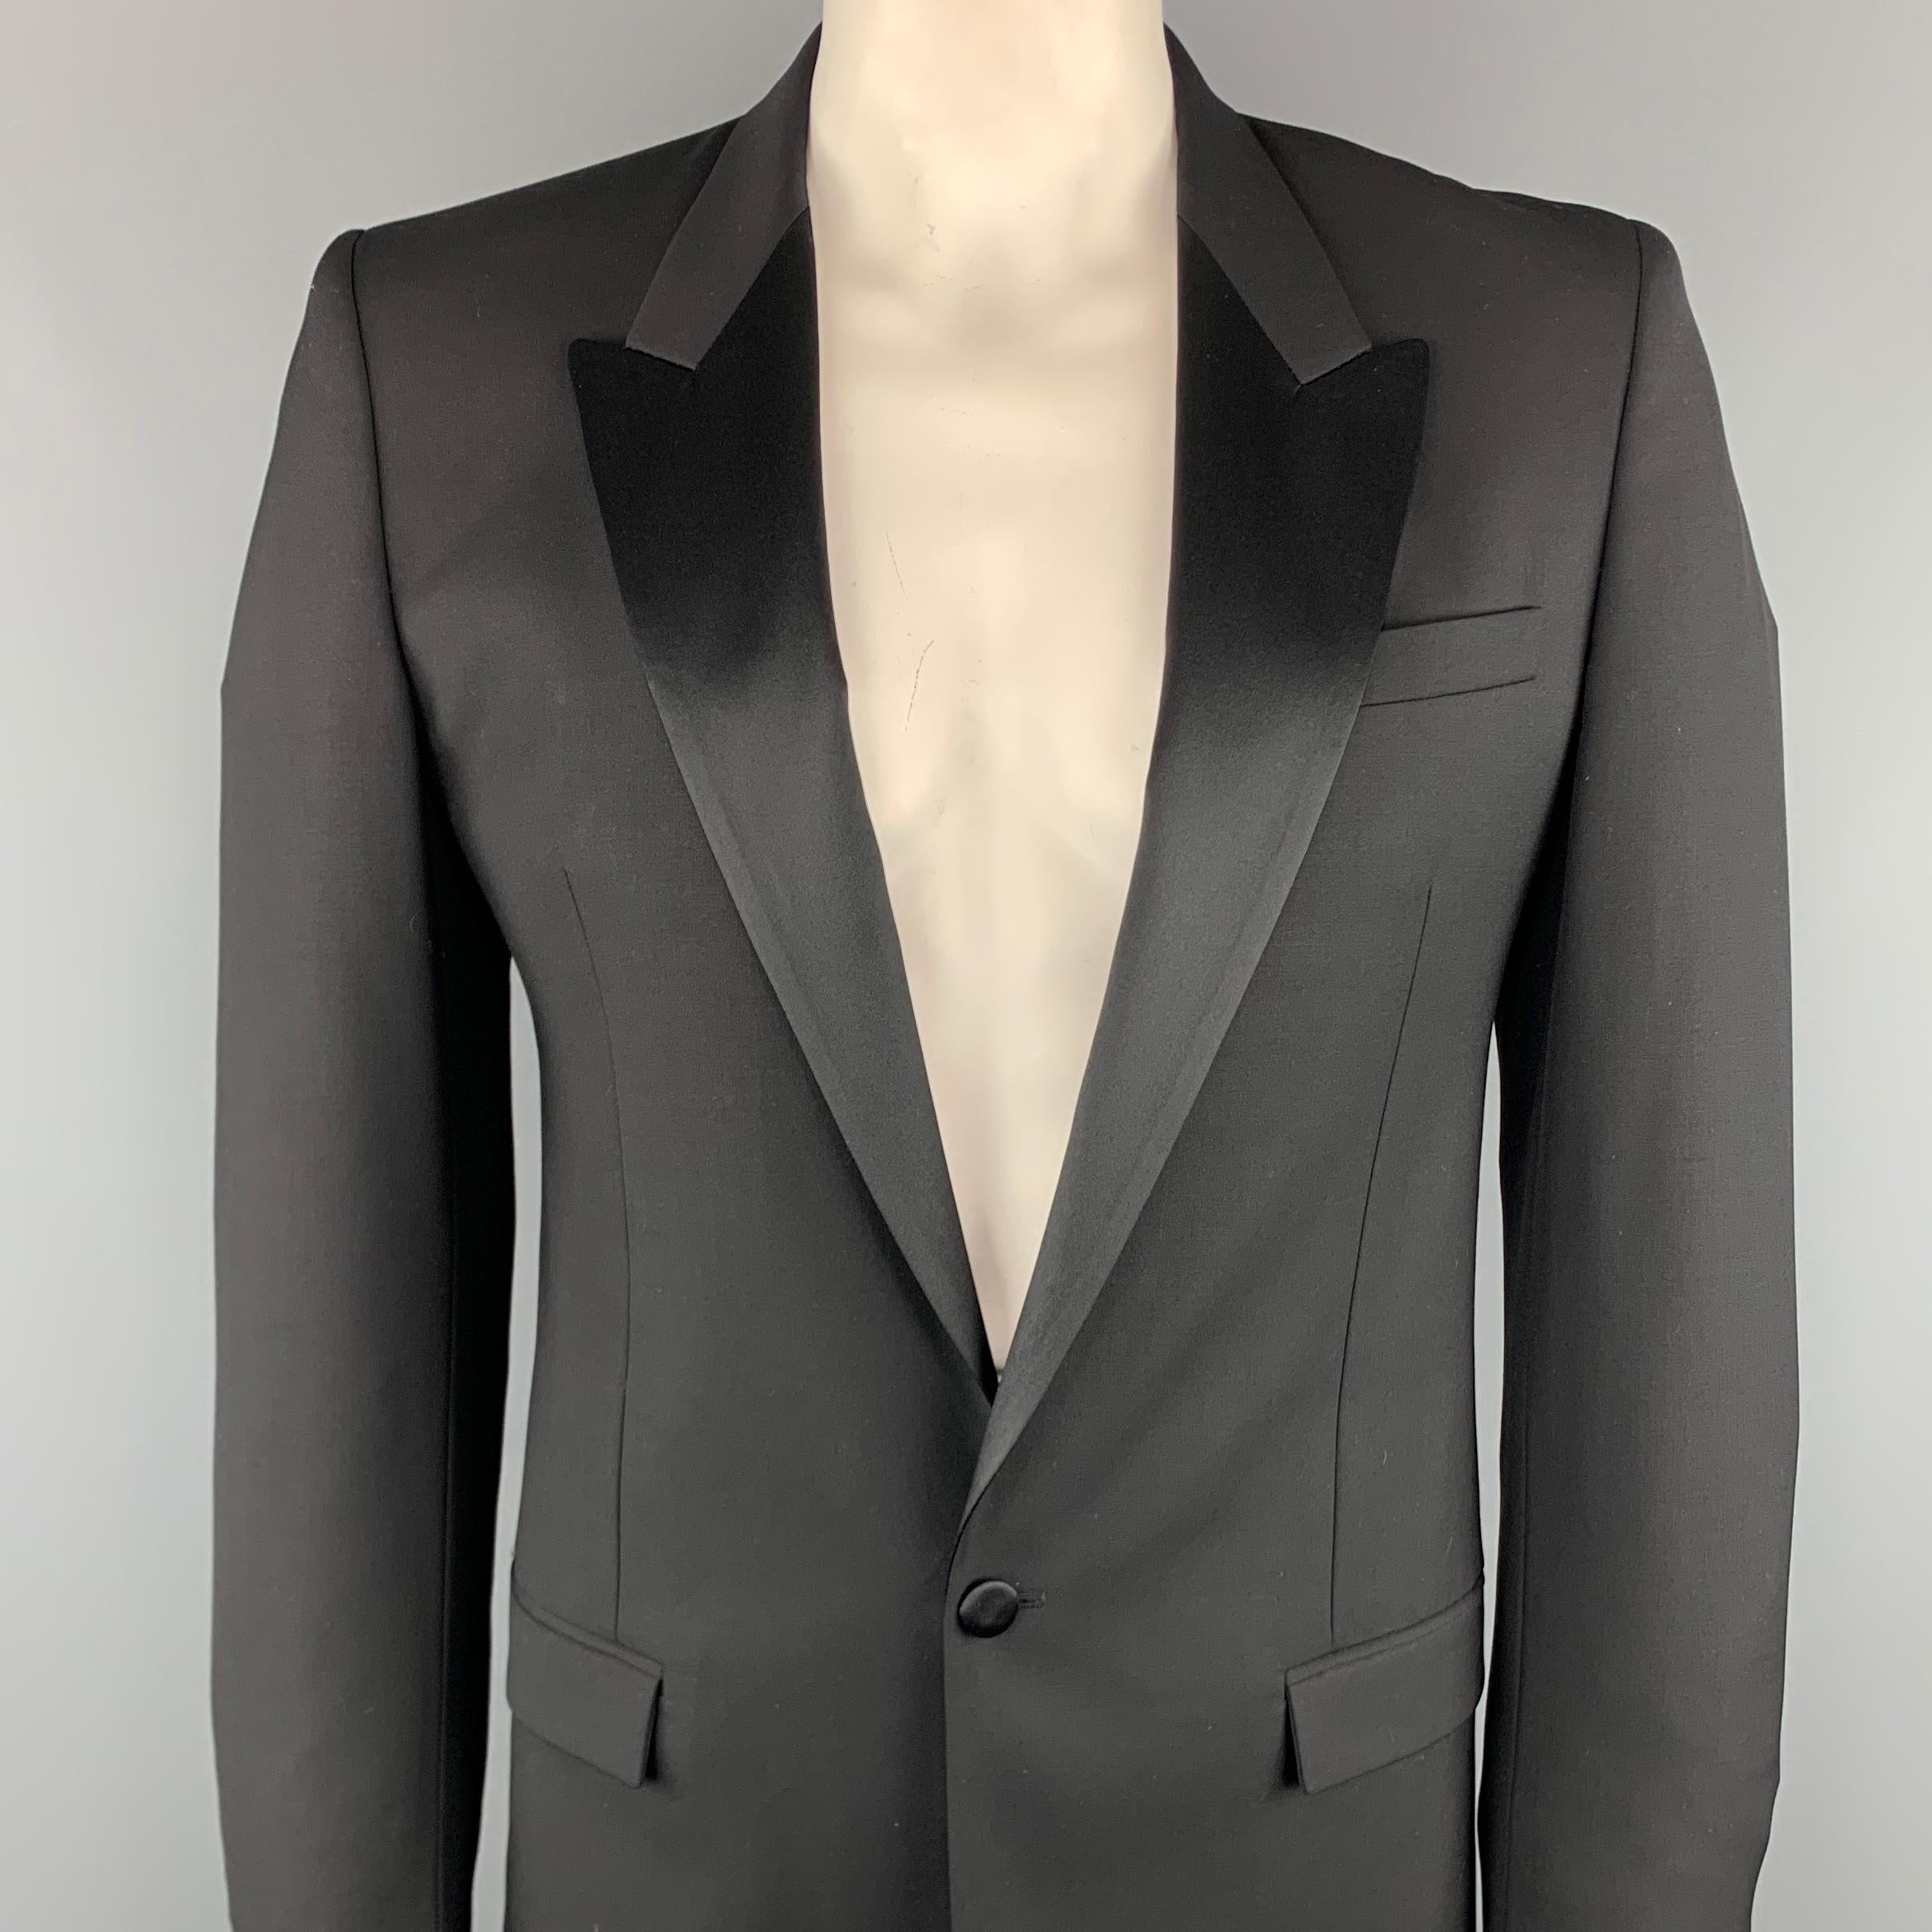 MARC JACOBS tuxedo sport coat comes in a black wool with a peak lapel and a single button closure. Made in Italy.



Excellent Pre-Owned Condition. 
Marked: IT 52

Measurements:

Shoulder: 17.5 in. 
Chest: 37 in. 
Sleeve: 26.5 in. 
Length: 30.5 in. 